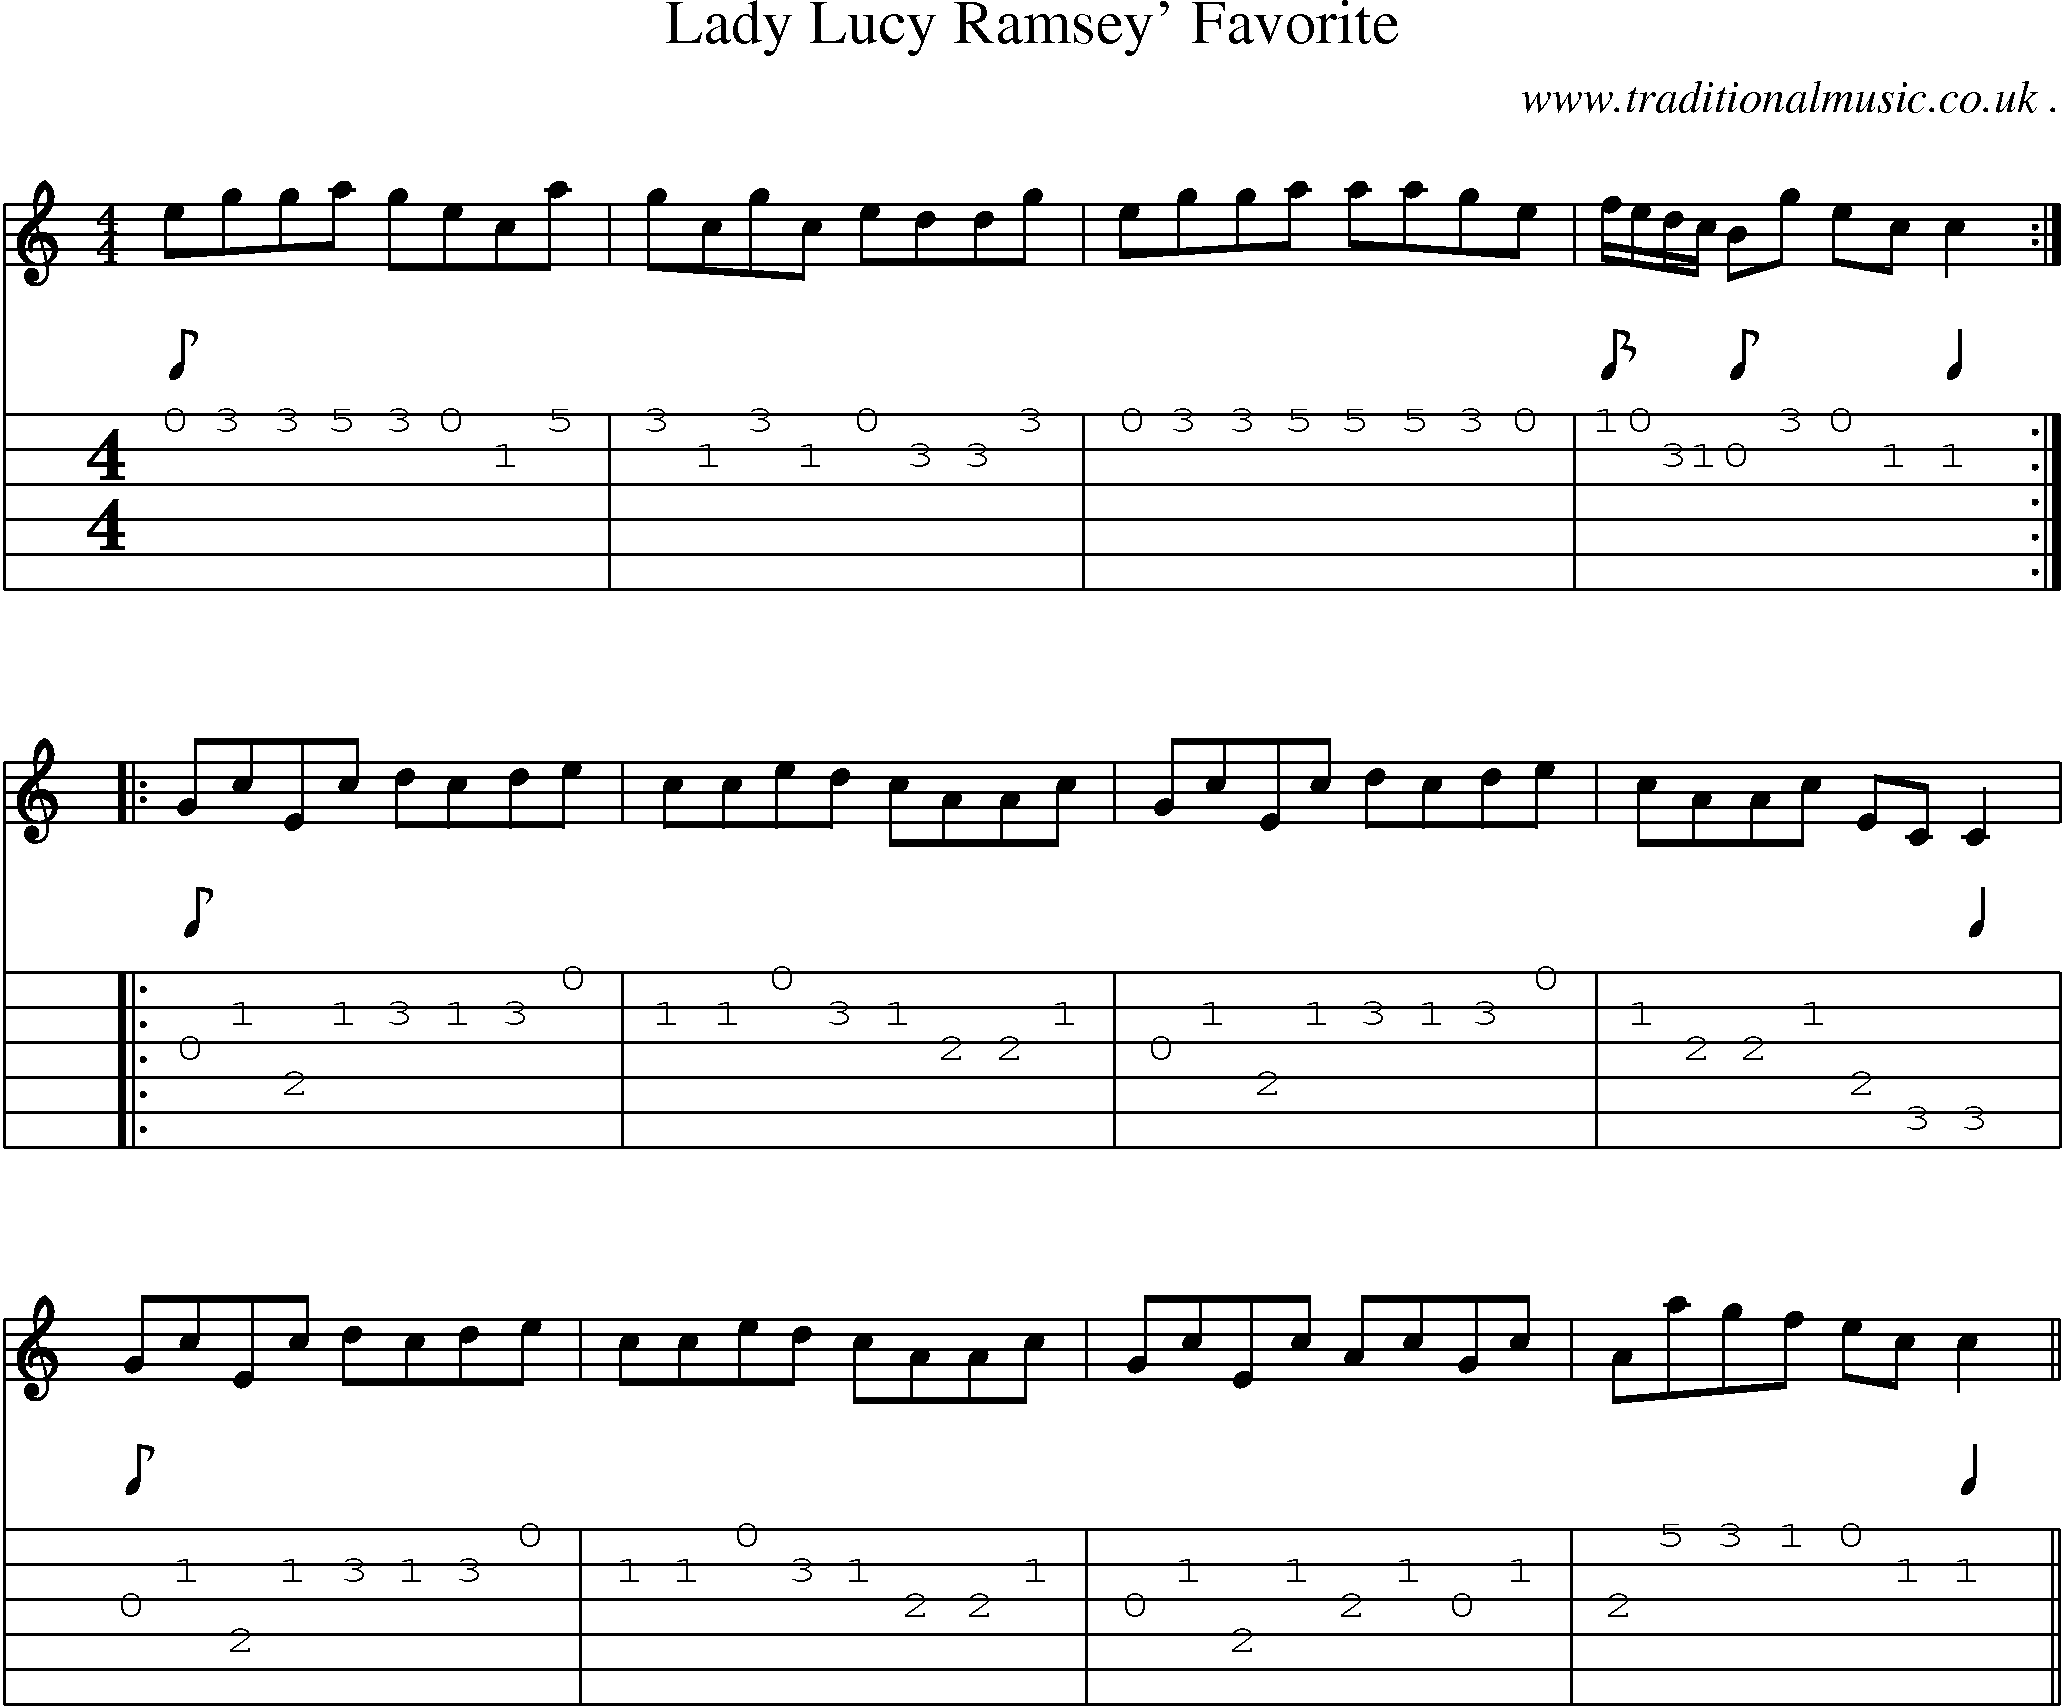 Sheet-Music and Guitar Tabs for Lady Lucy Ramsey Favorite